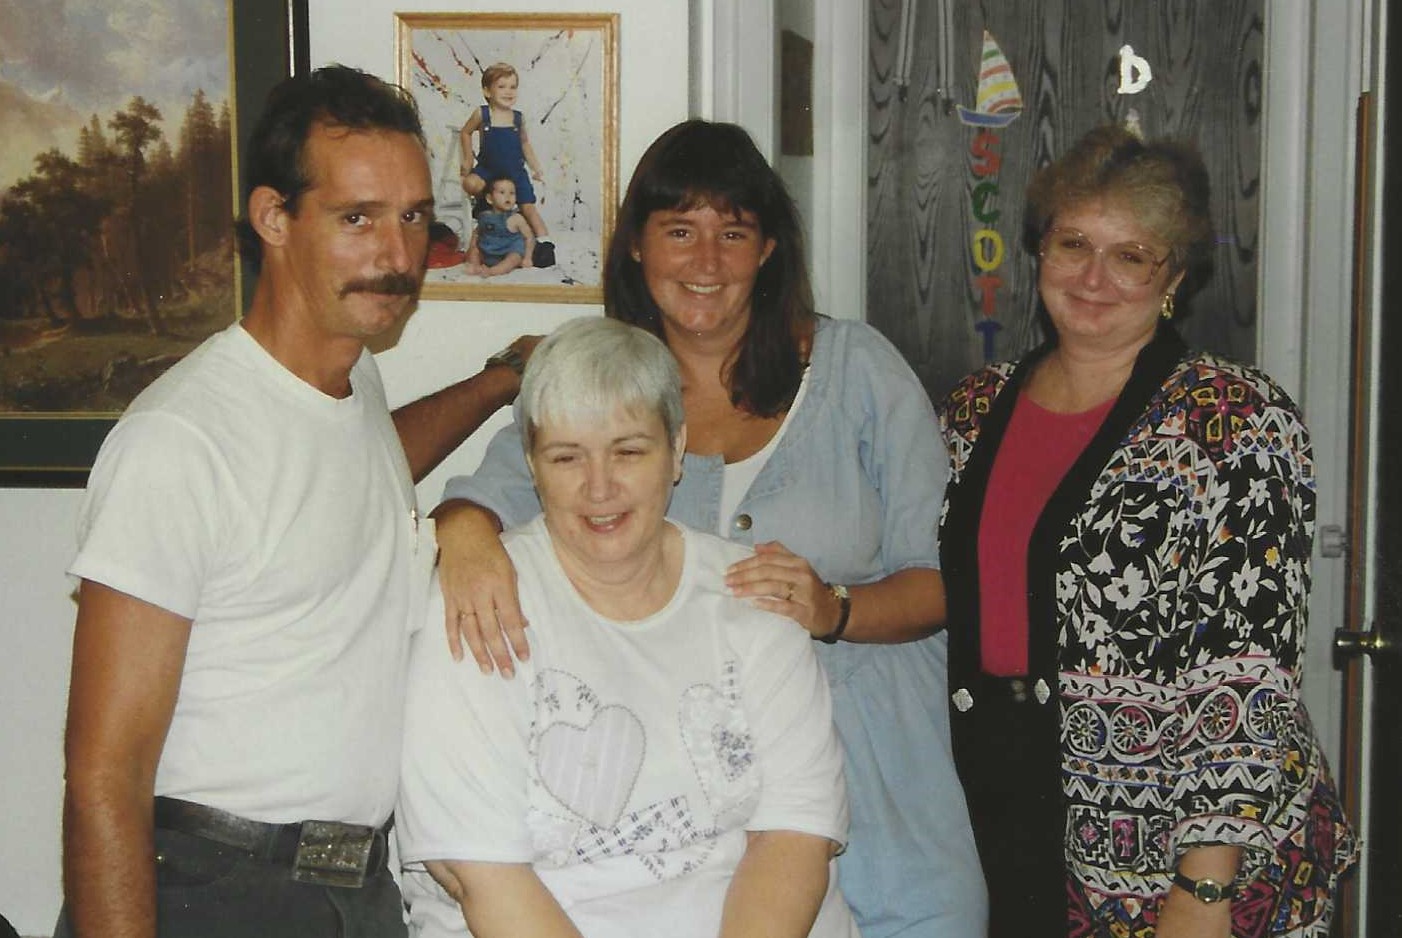 Linda with her children, Buddy, Donna and Wanda in 1996.